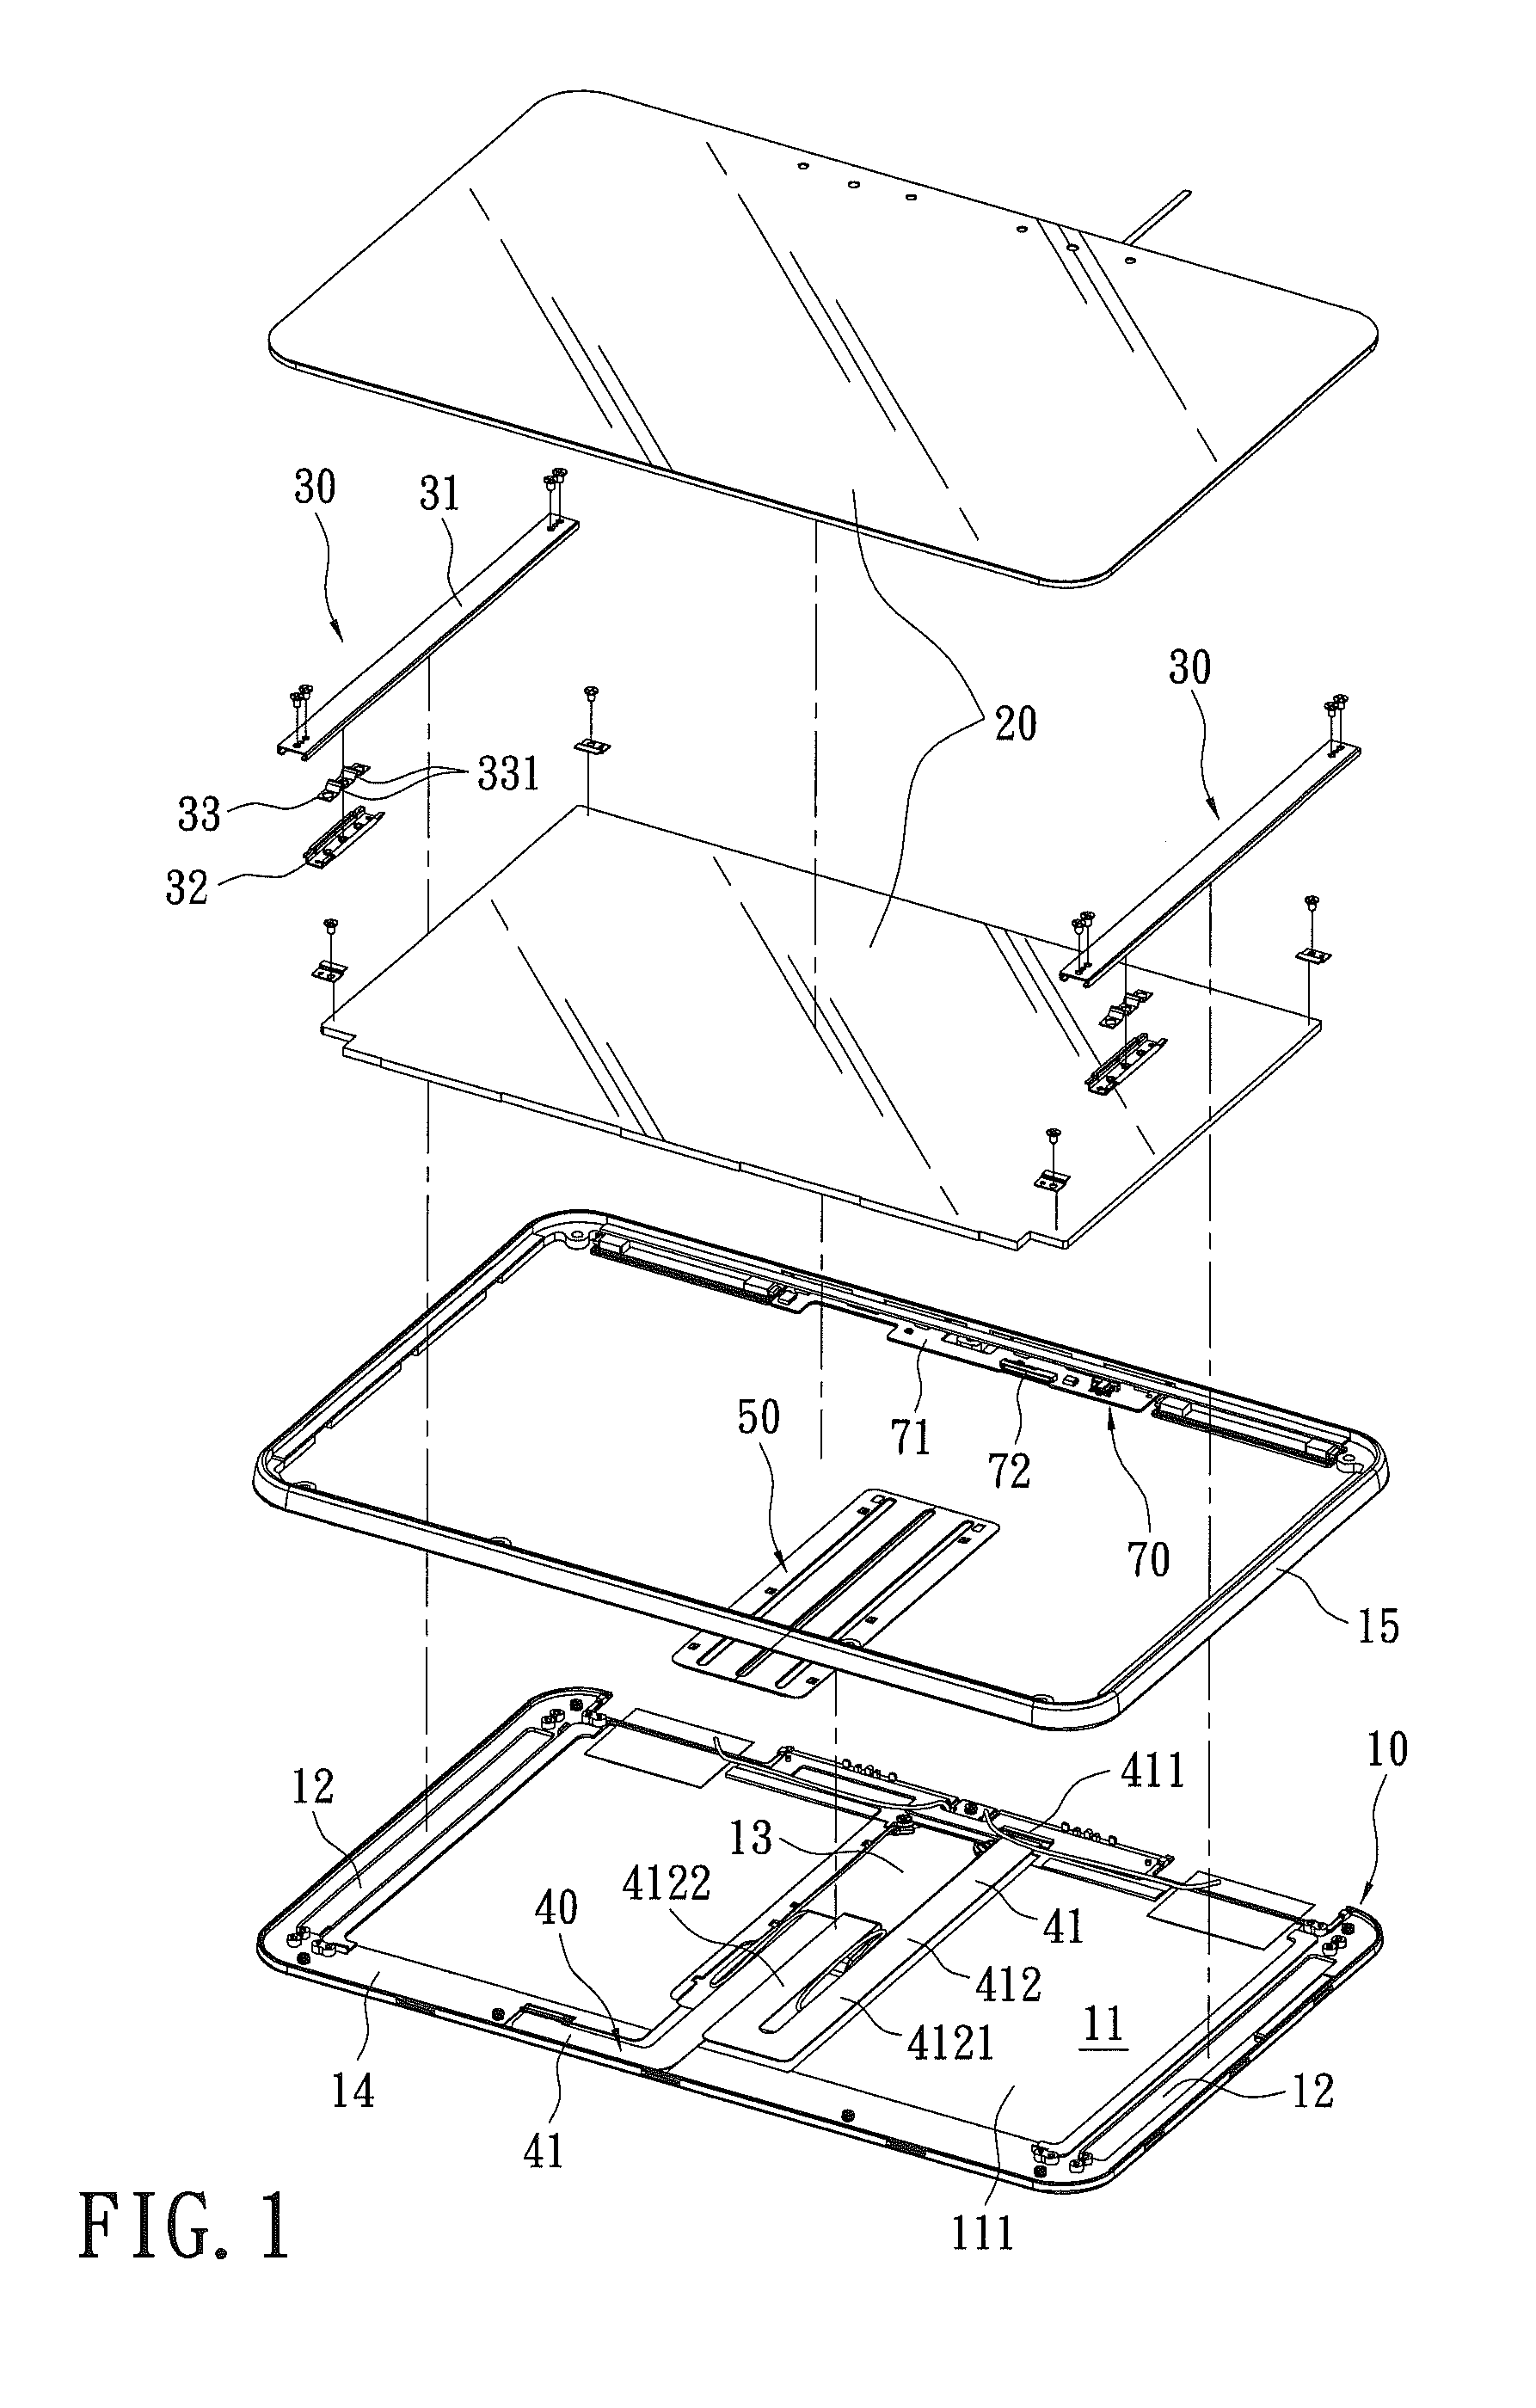 Display structure of slip-cover-hinge electronic device